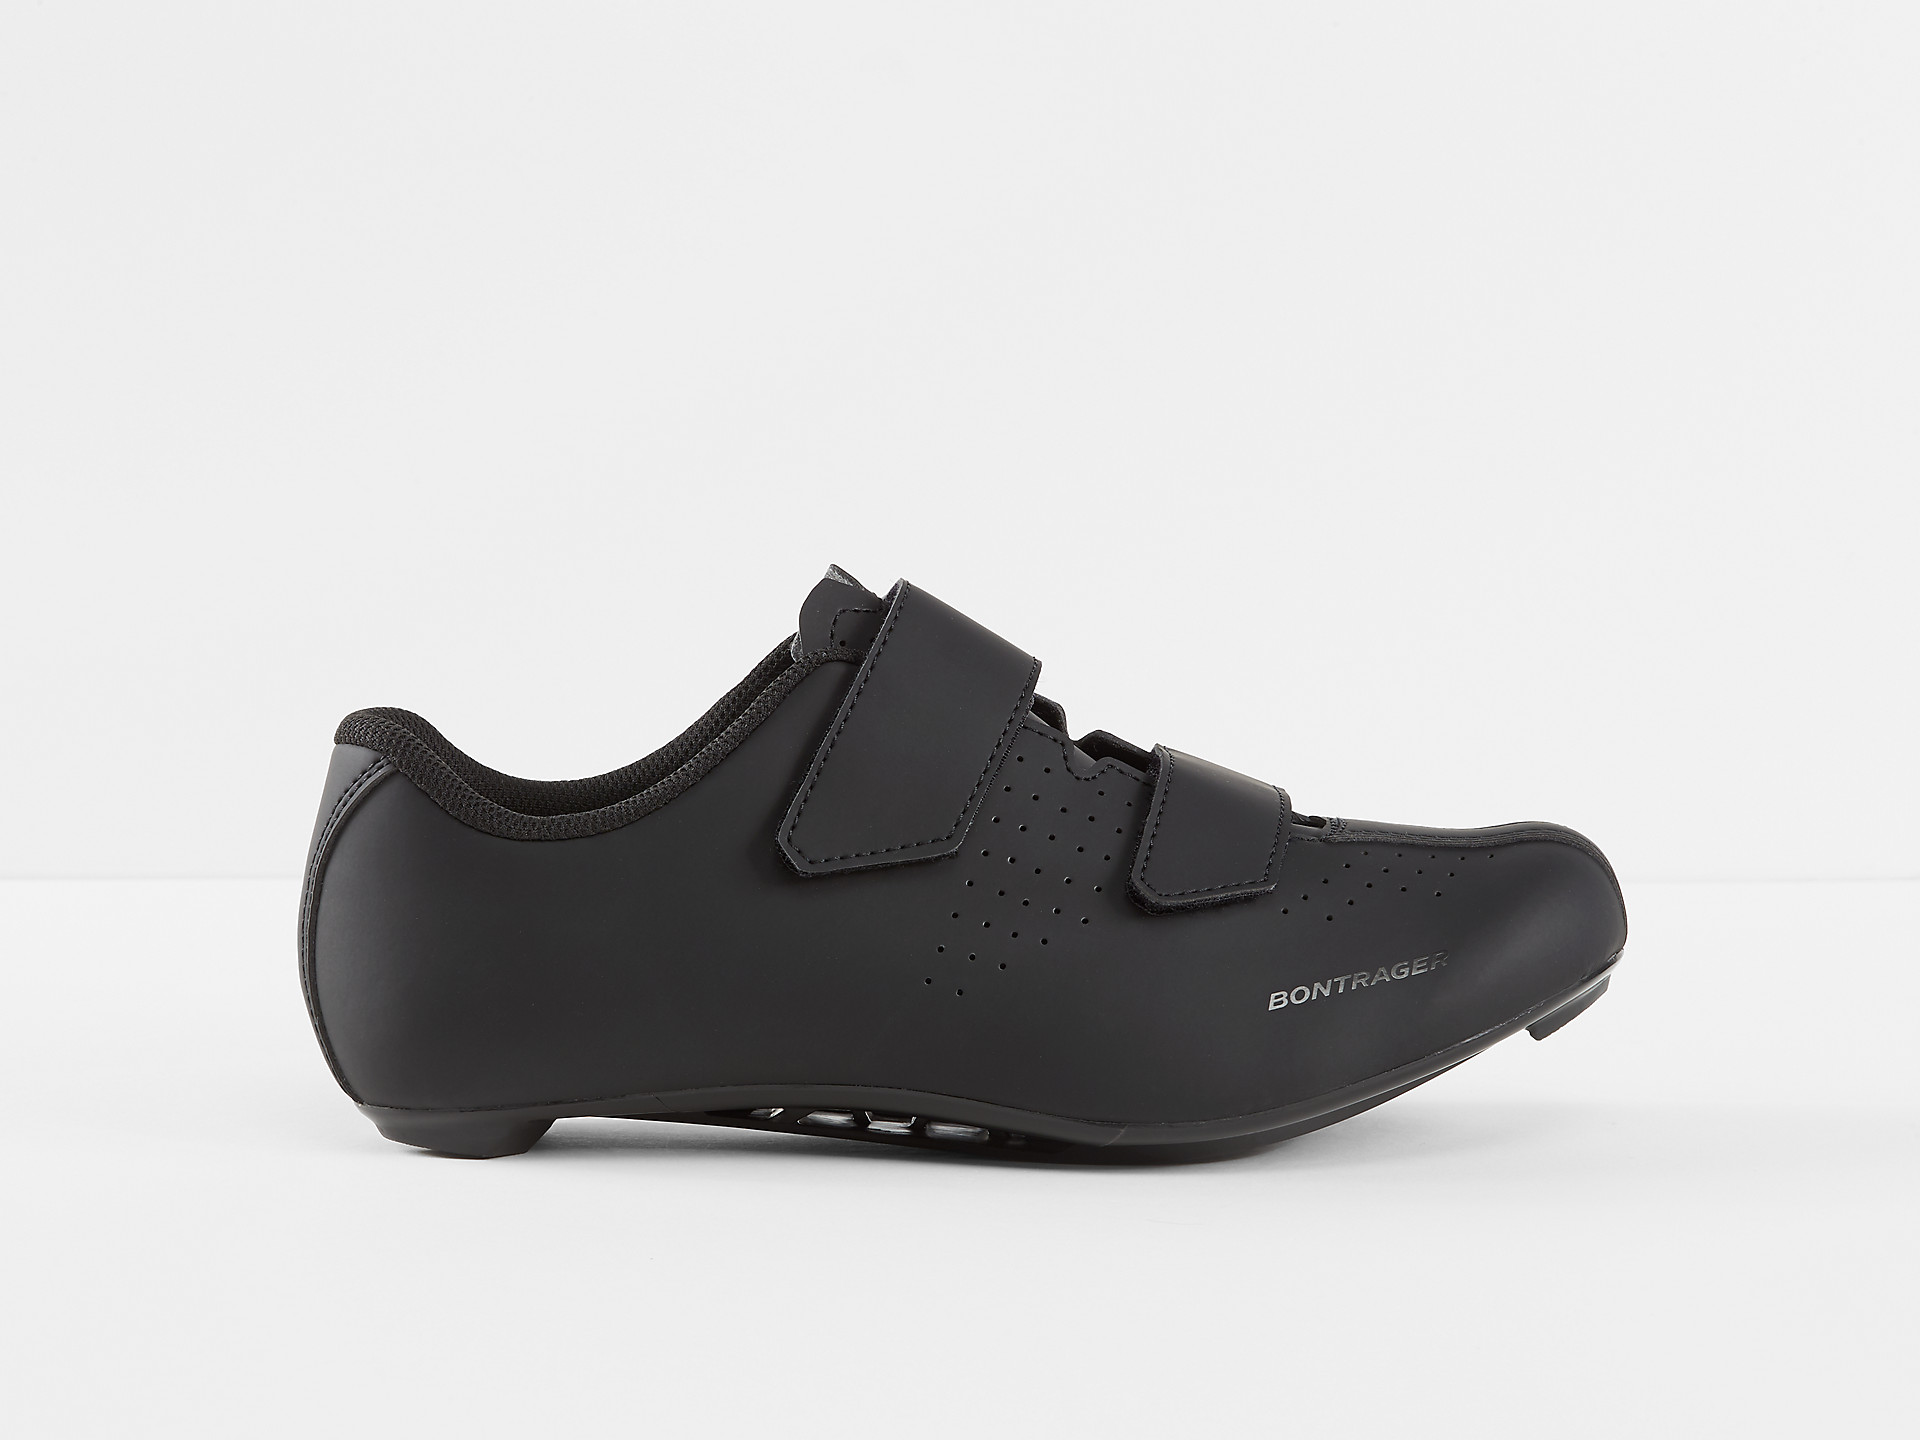 <a href="https://cycles-clement.be/product/bont-chaussures-solstice-39-bla/">BONT CHAUSSURES SOLSTICE 39 BLA</a>